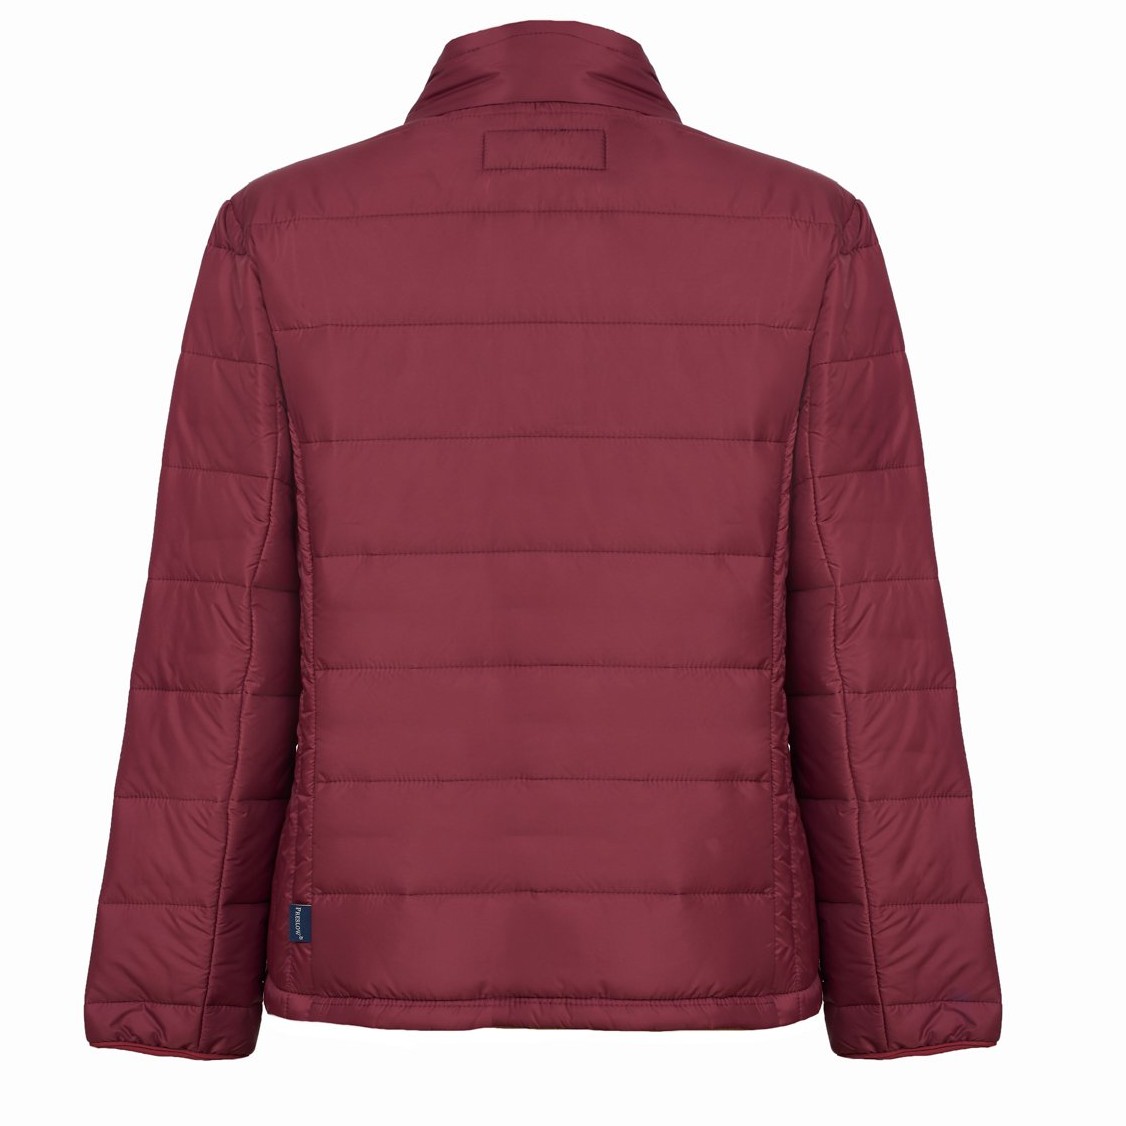 Light Nylon  Puffer  Jacket- Linares Style- Wine Red Color